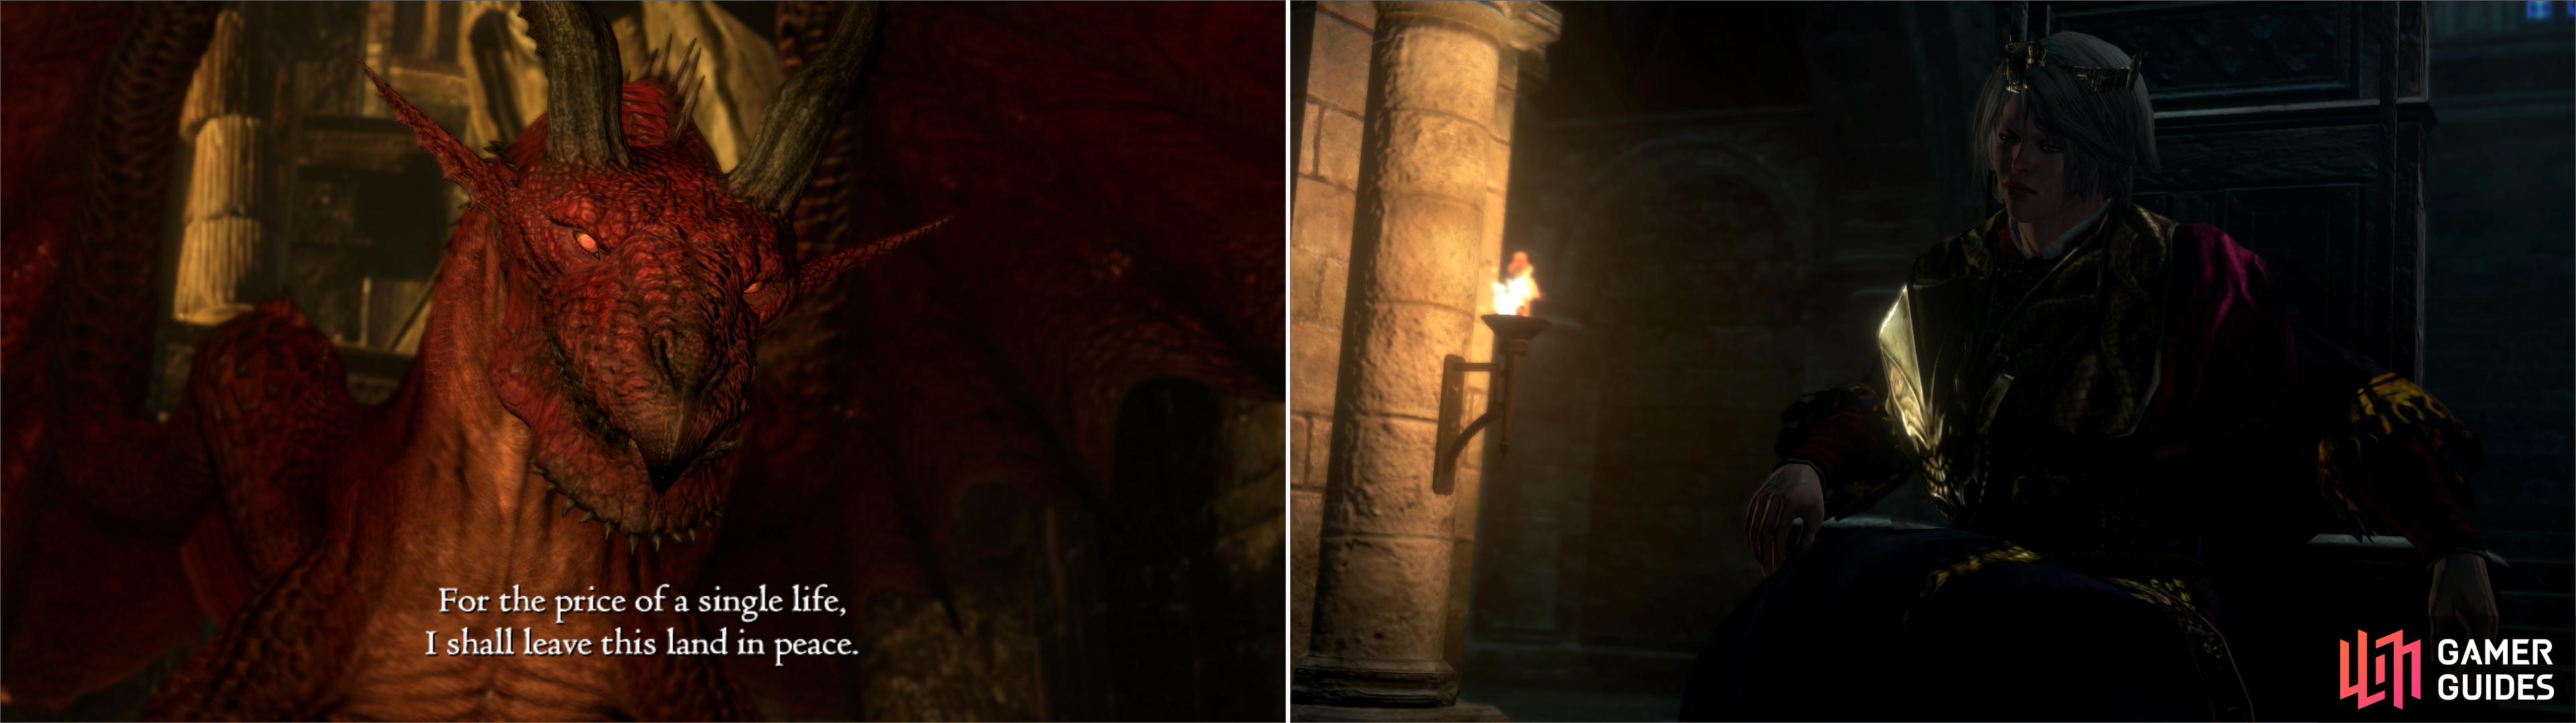 Accept the Dragon’s offer (left) and you can follow in the Duke’s footsteps as ruler of Gransys (right).